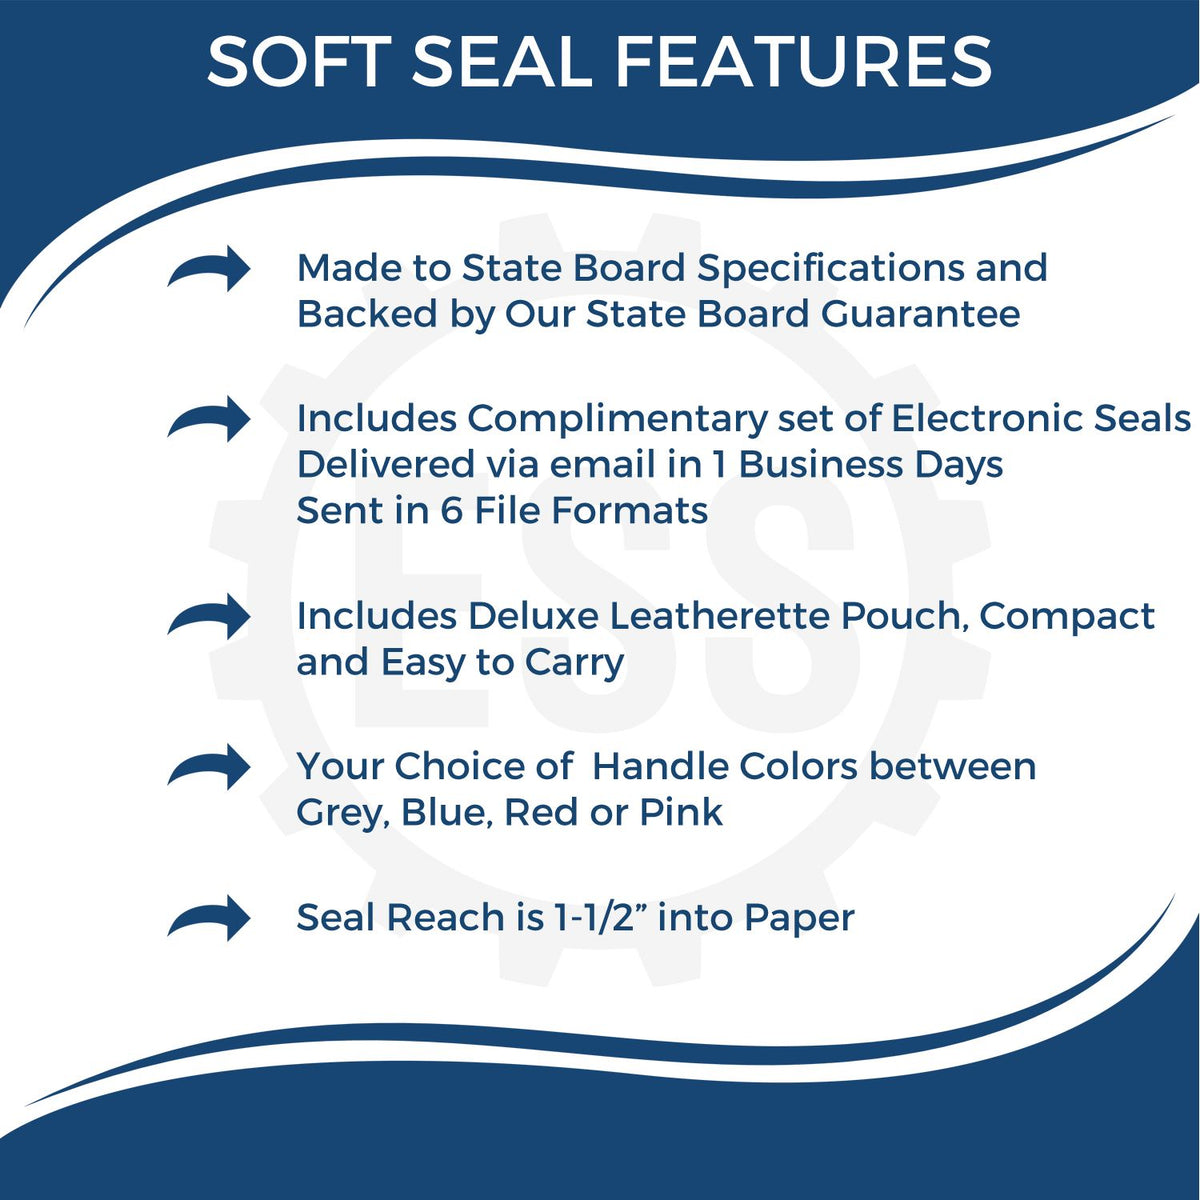 A picture of an infographic highlighting the selling points for the Soft Delaware Professional Engineer Seal